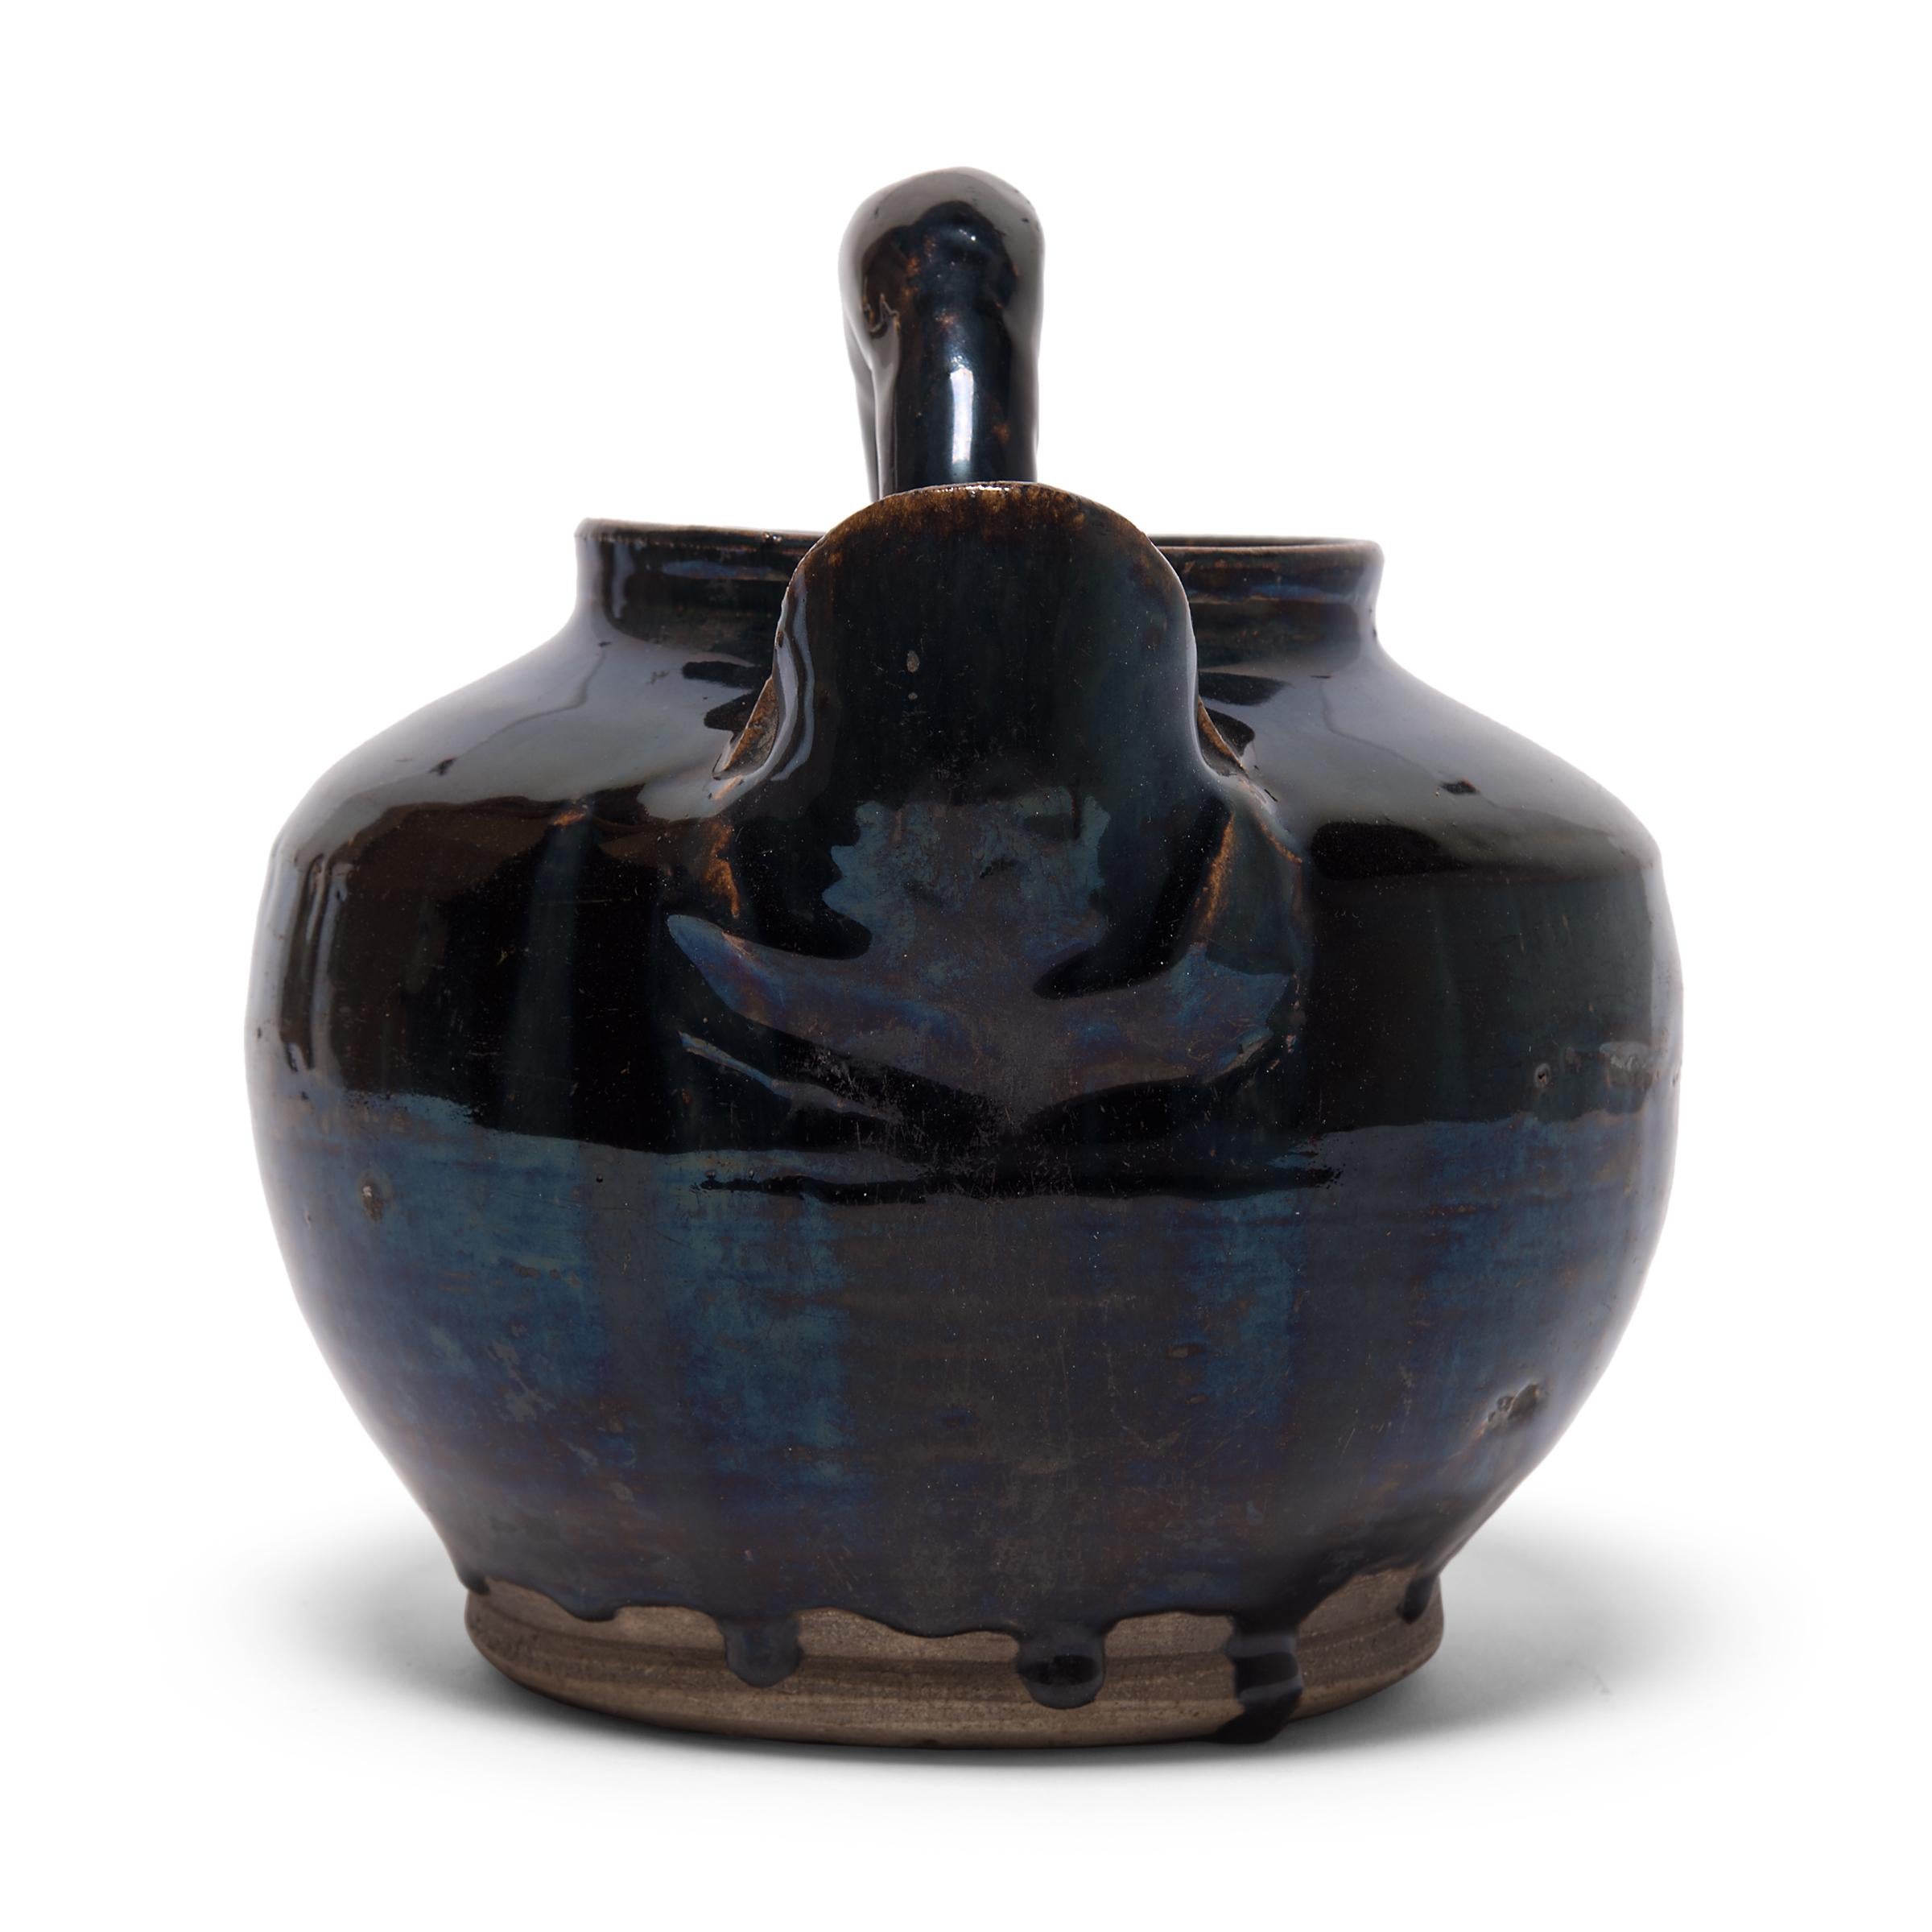 A dark blue-black glaze coats the round body of this squat kitchen vessel, dripping down its sides with subtle iridescence. The early 20th century spouted vessel was once used for storing wine or soy sauce in a Qing-dynasty kitchen, as evidenced by